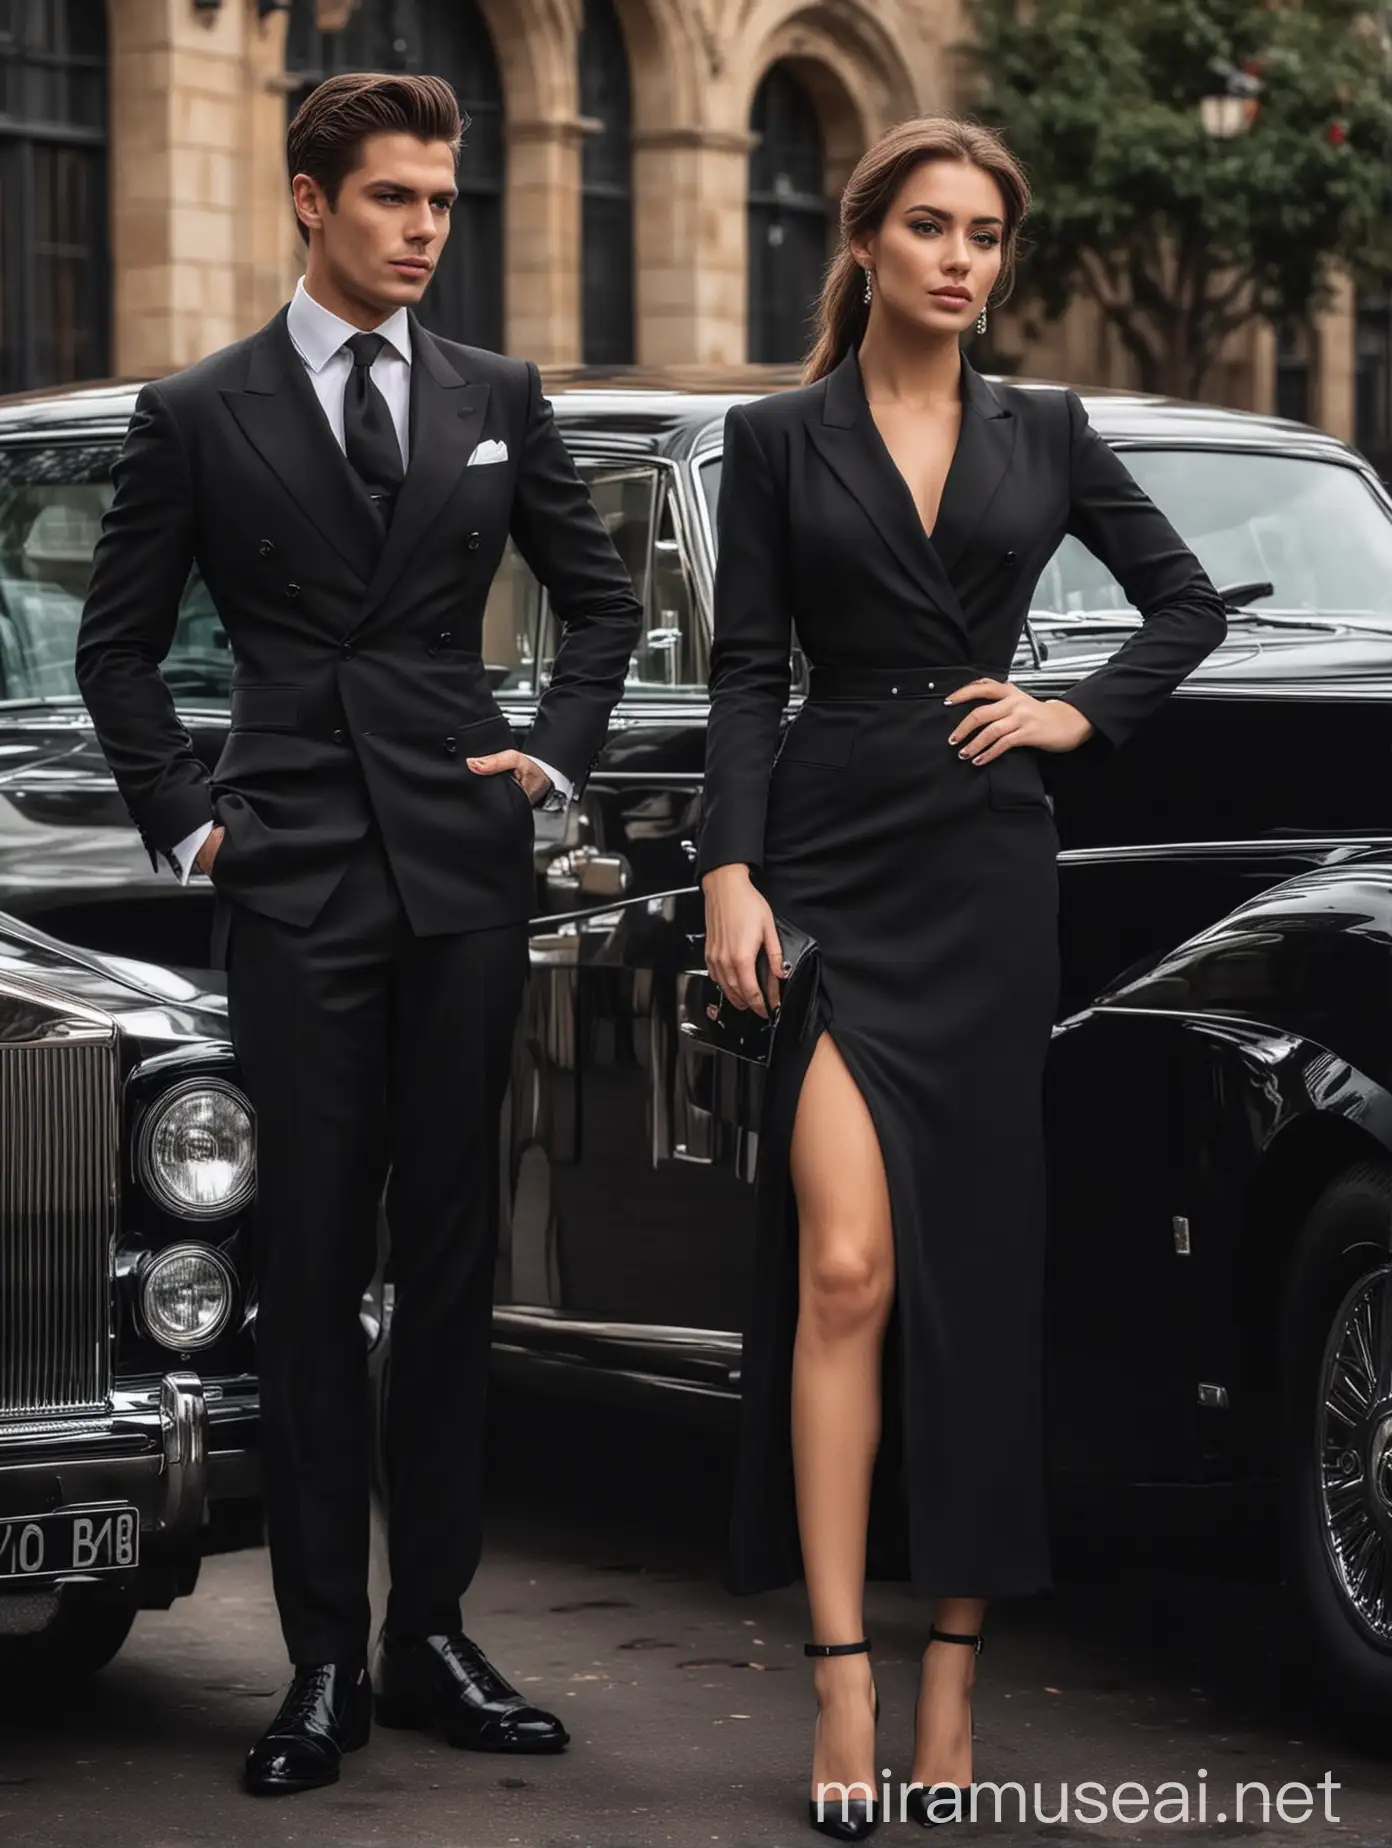 Elegant Woman in Black Dress with Rolls Royce and Admirer